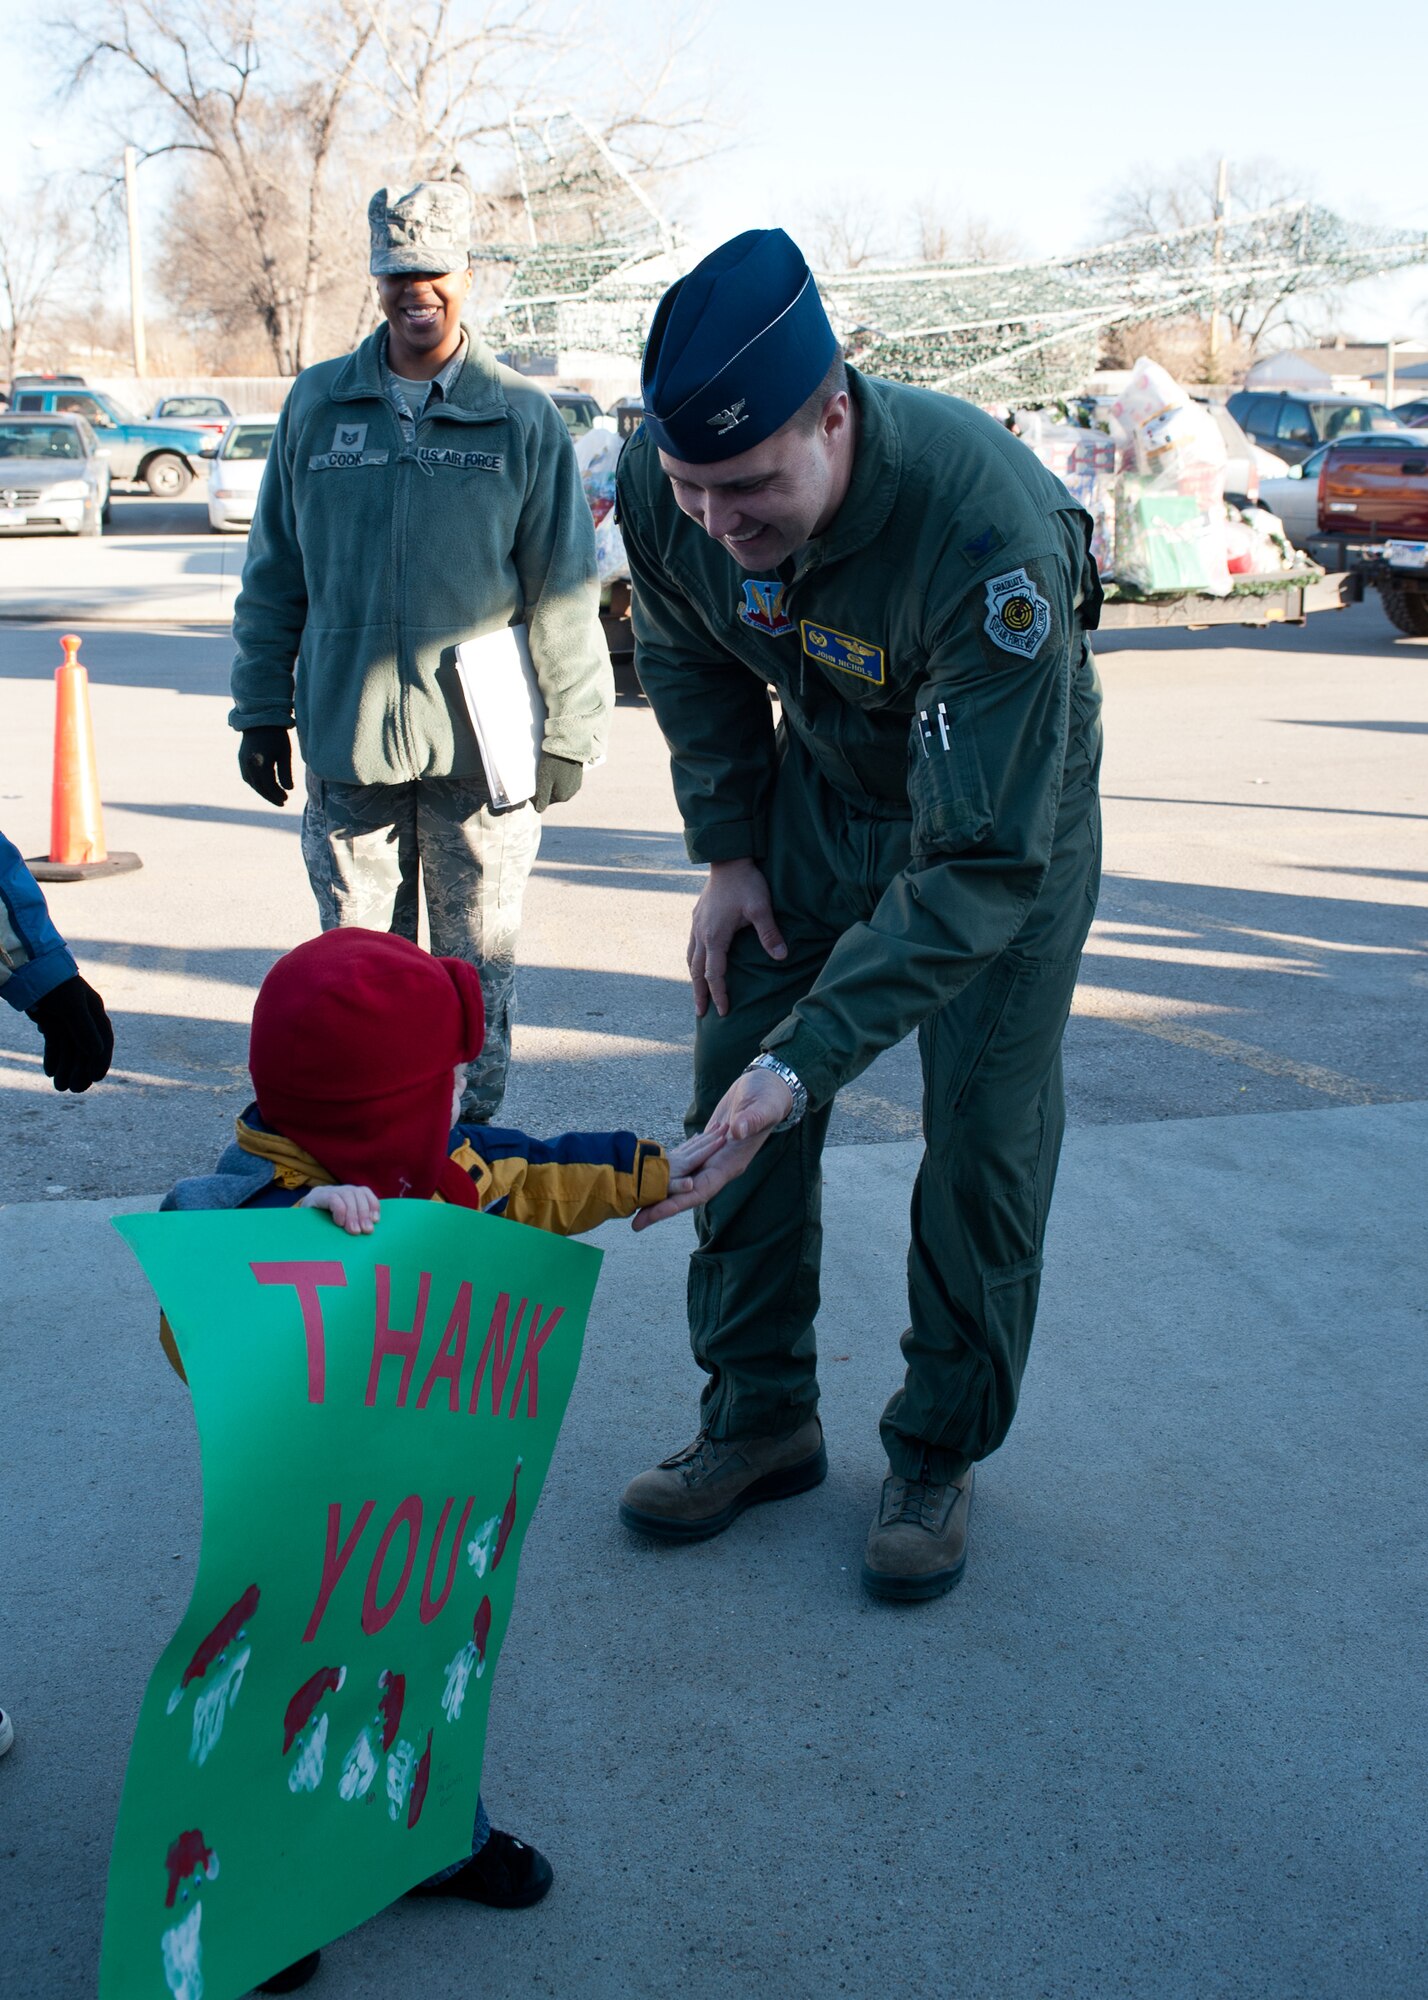 Col. John Nichols, 28th Operations Group commander, gets a high five from the children enrolled in the Youth & Family Services Child Care program during the 28th OG Angel Tree event in Rapid City, S.D., Dec. 15, 2011. More than 180 gifts were donated by members of the 28th OG, bringing joy to children throughout the community. (U.S. Air Force photo by Airman Alystria Maurer/Released)